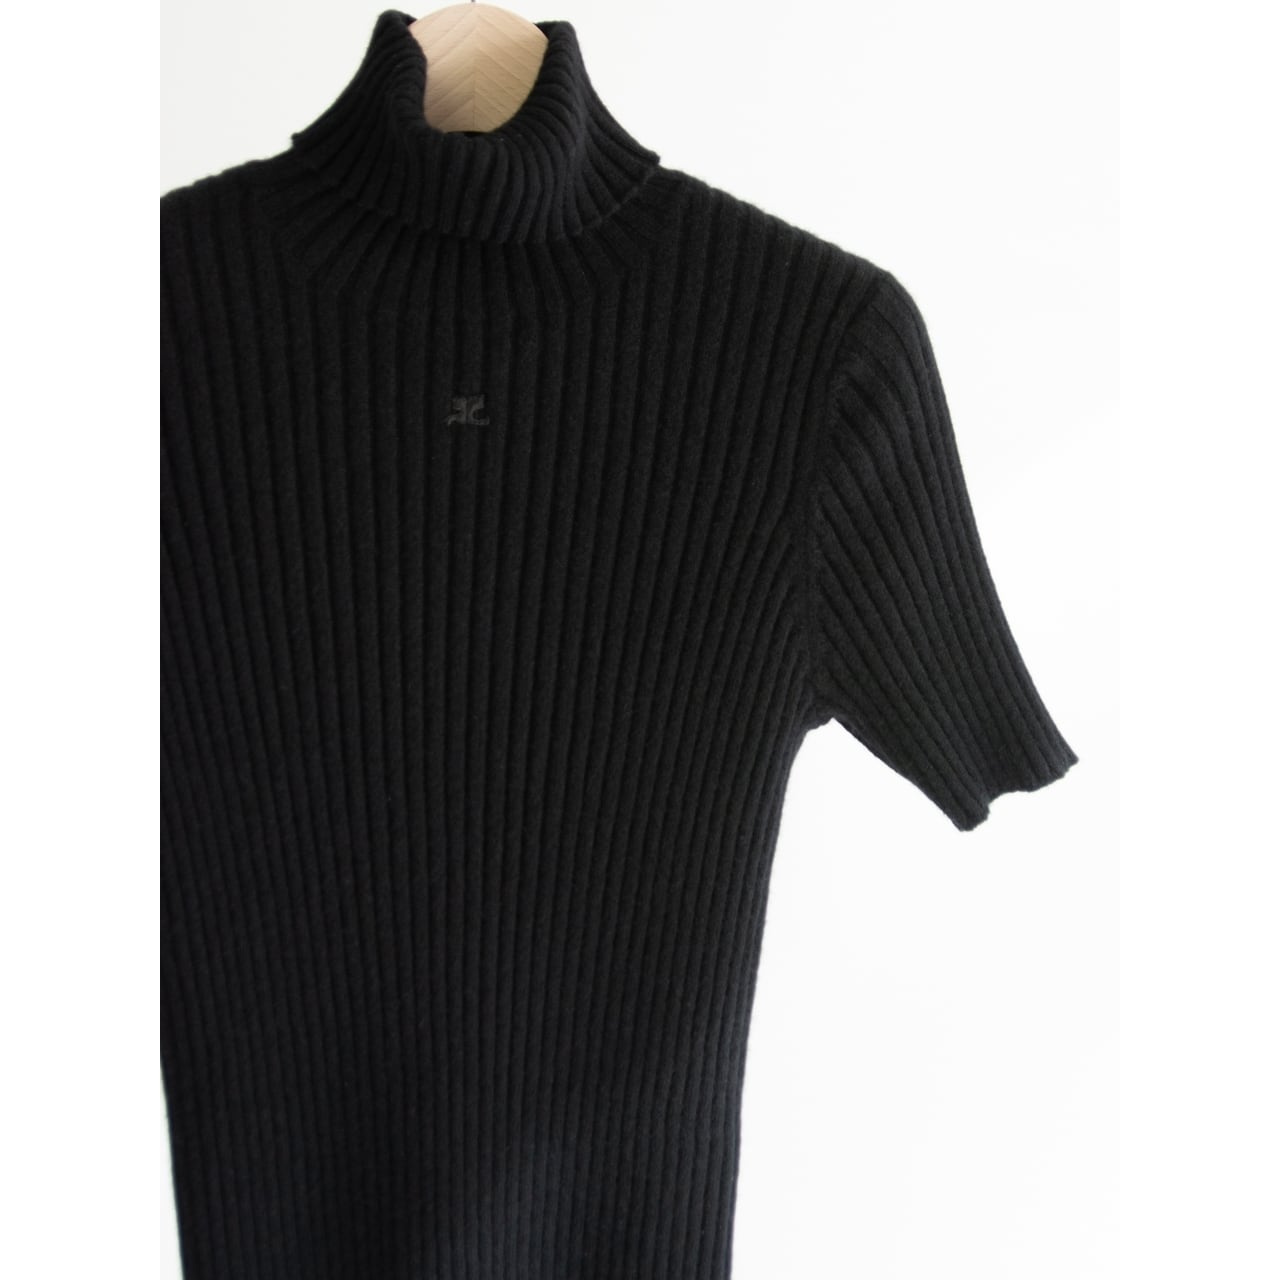 courreges】Made in China 100% Cashmere High Neck H/S Sweater